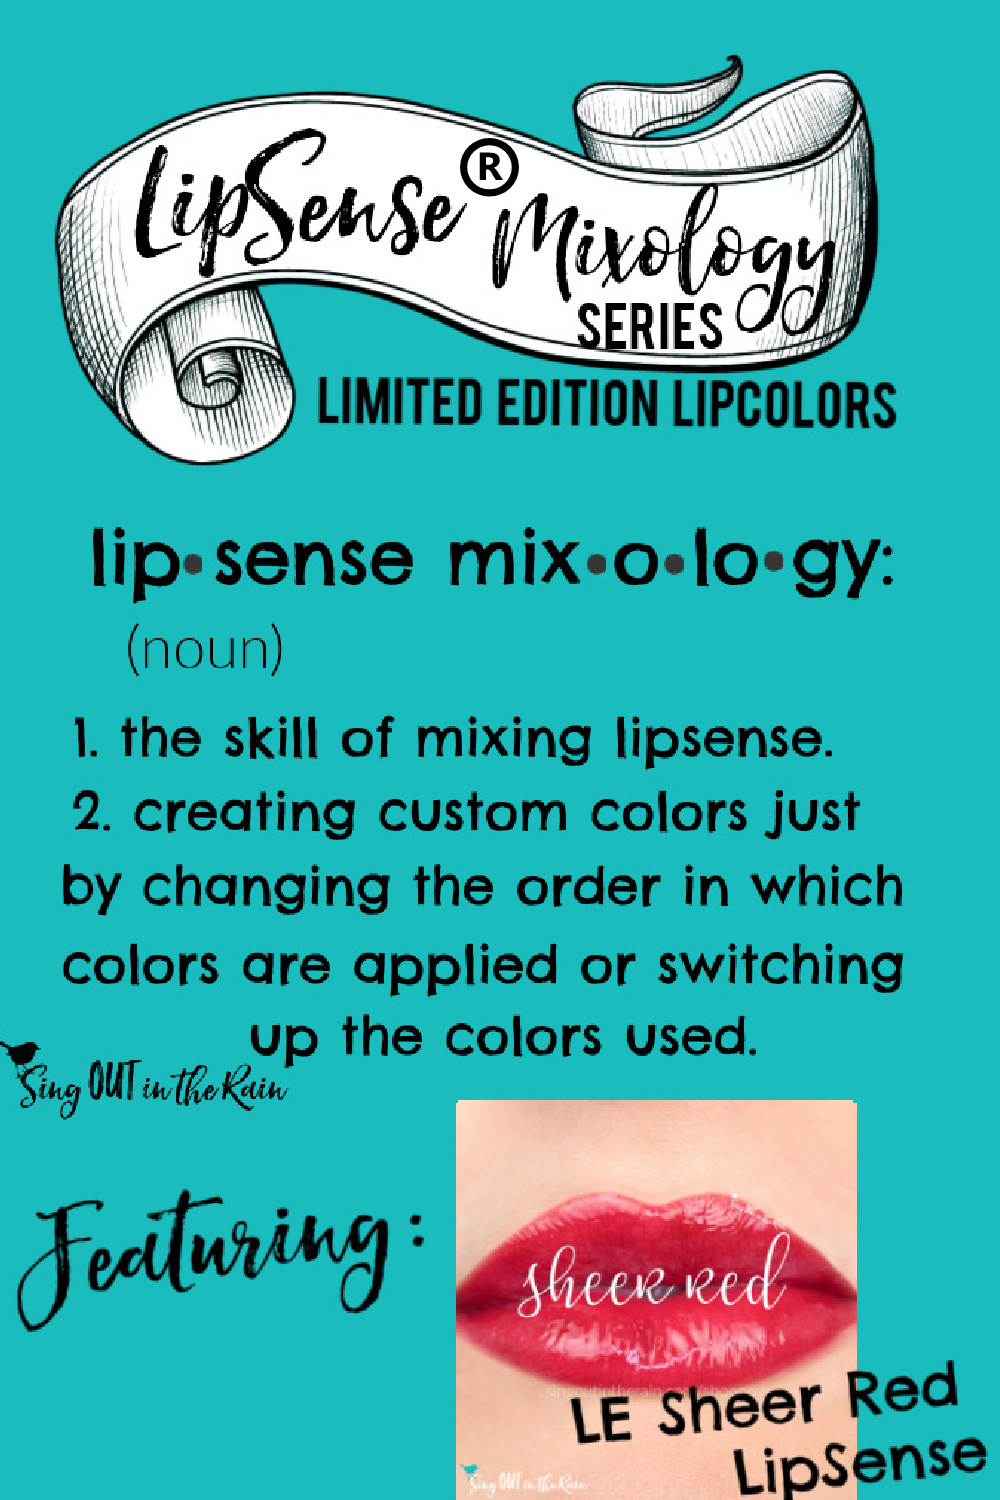 The Ultimate Guide to Sheer Red LipSense Mixology